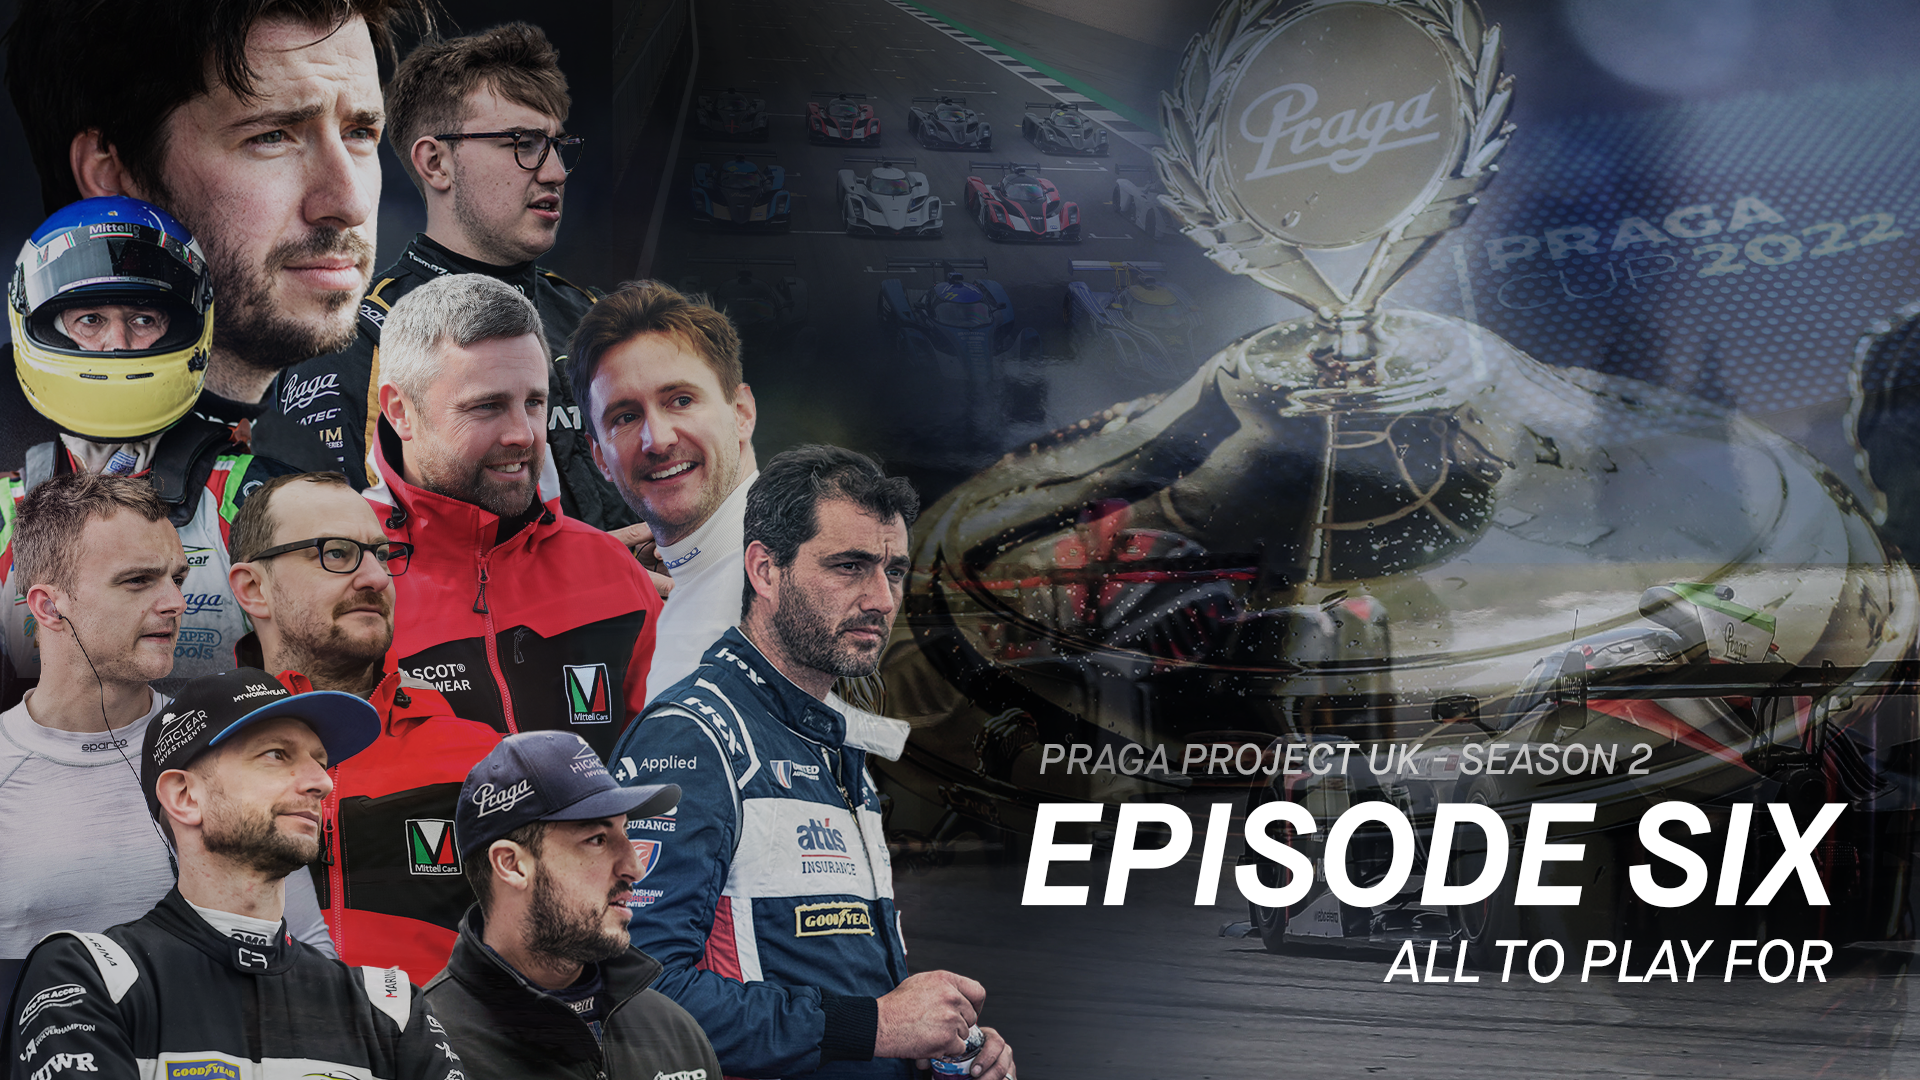 Season 2, Episode 6 - Who will take home the biggest prize in UK motorsport?